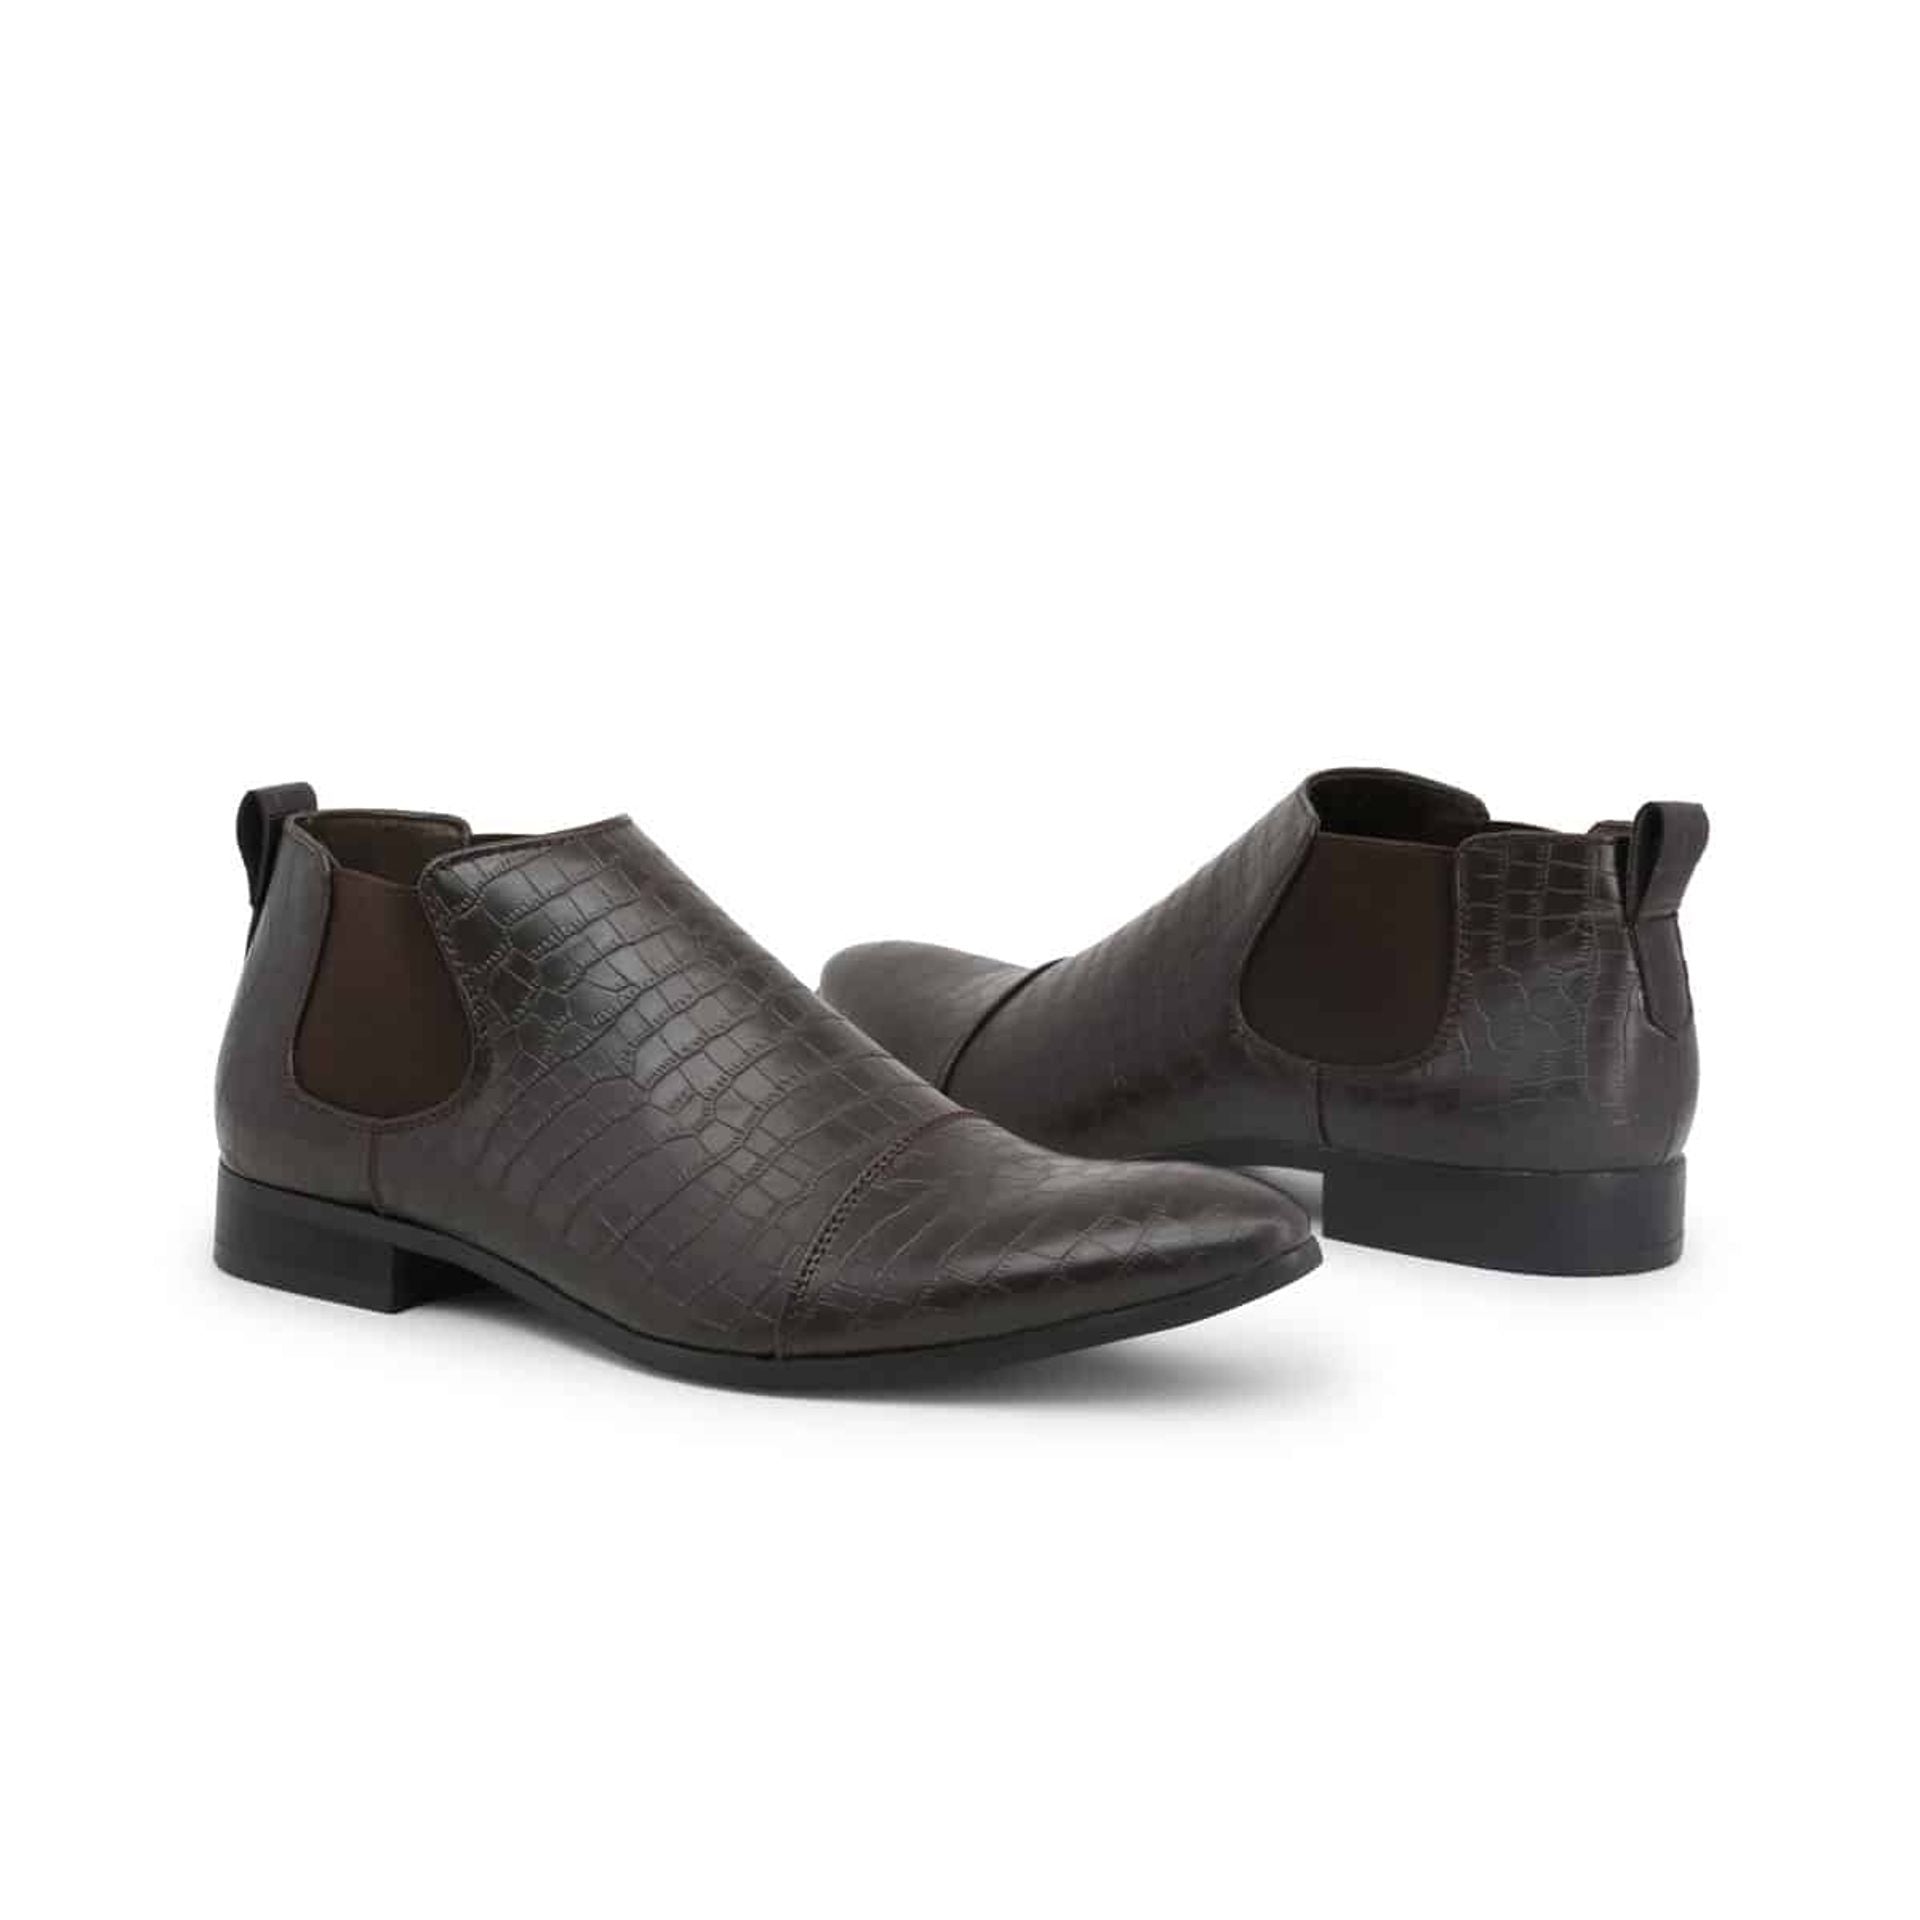 Duca Ankle boots